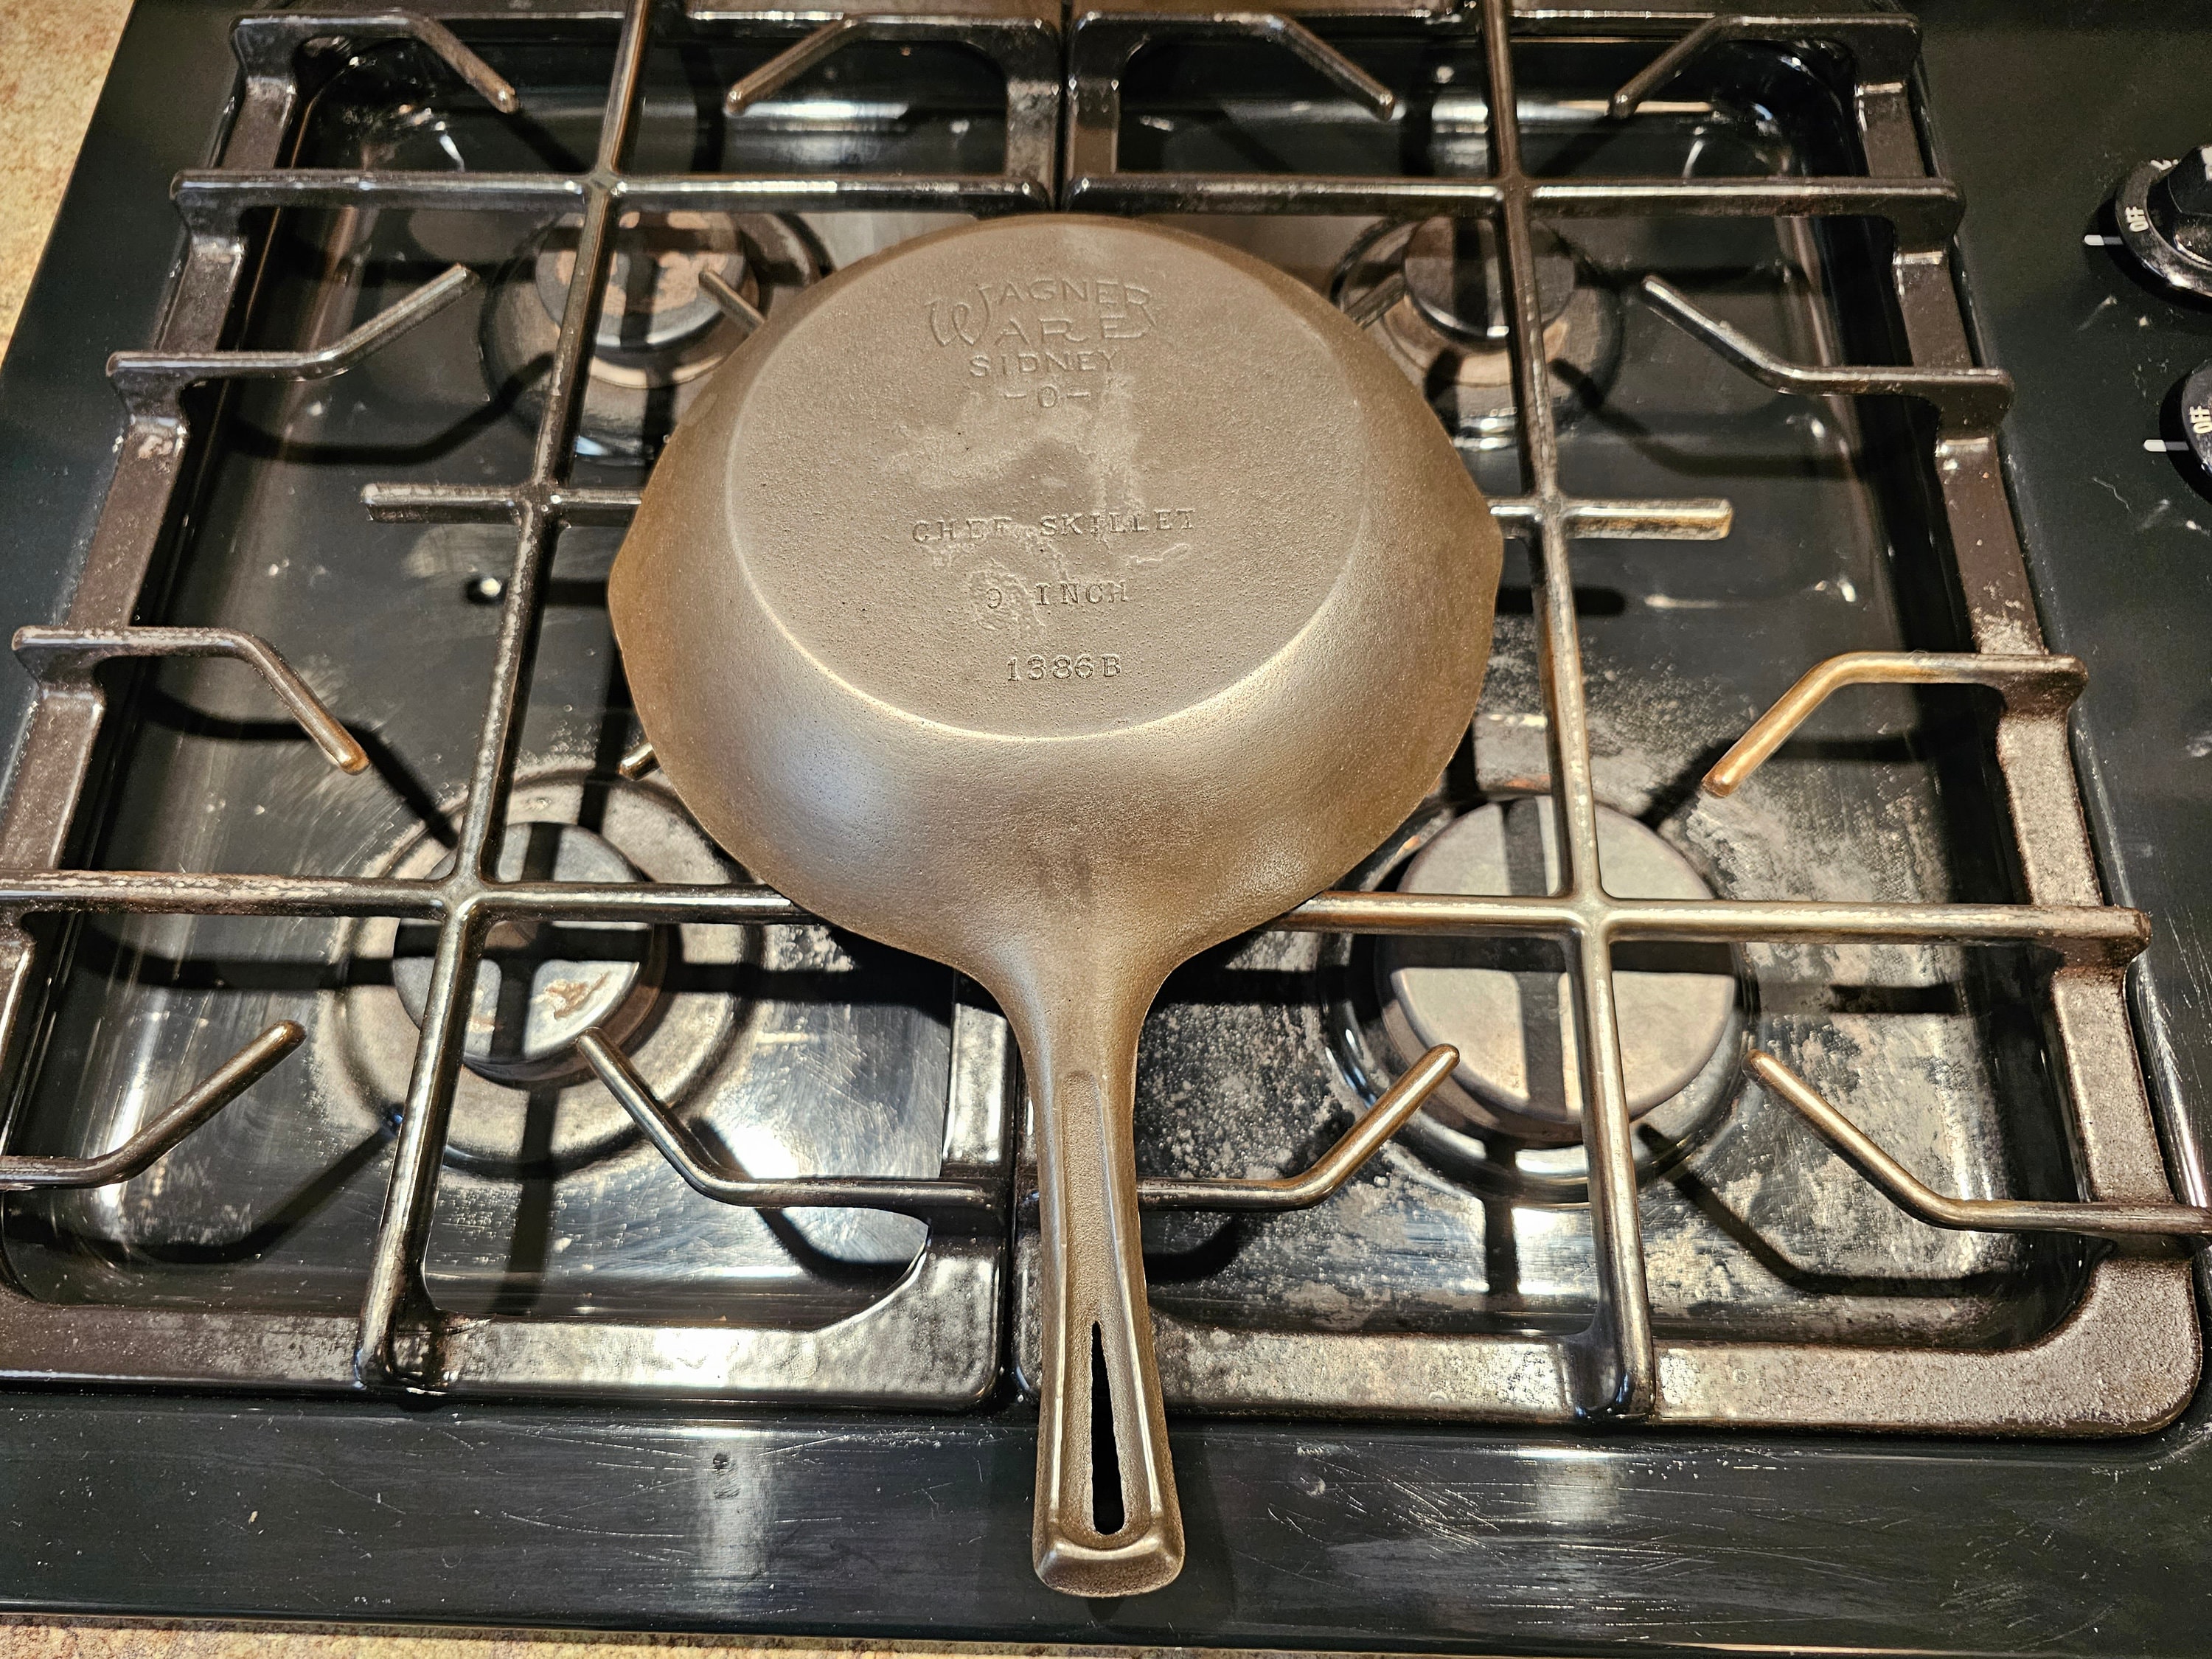 Vintage Wagner Ware Cast Iron Chef Skillet 9 Inch Pan 